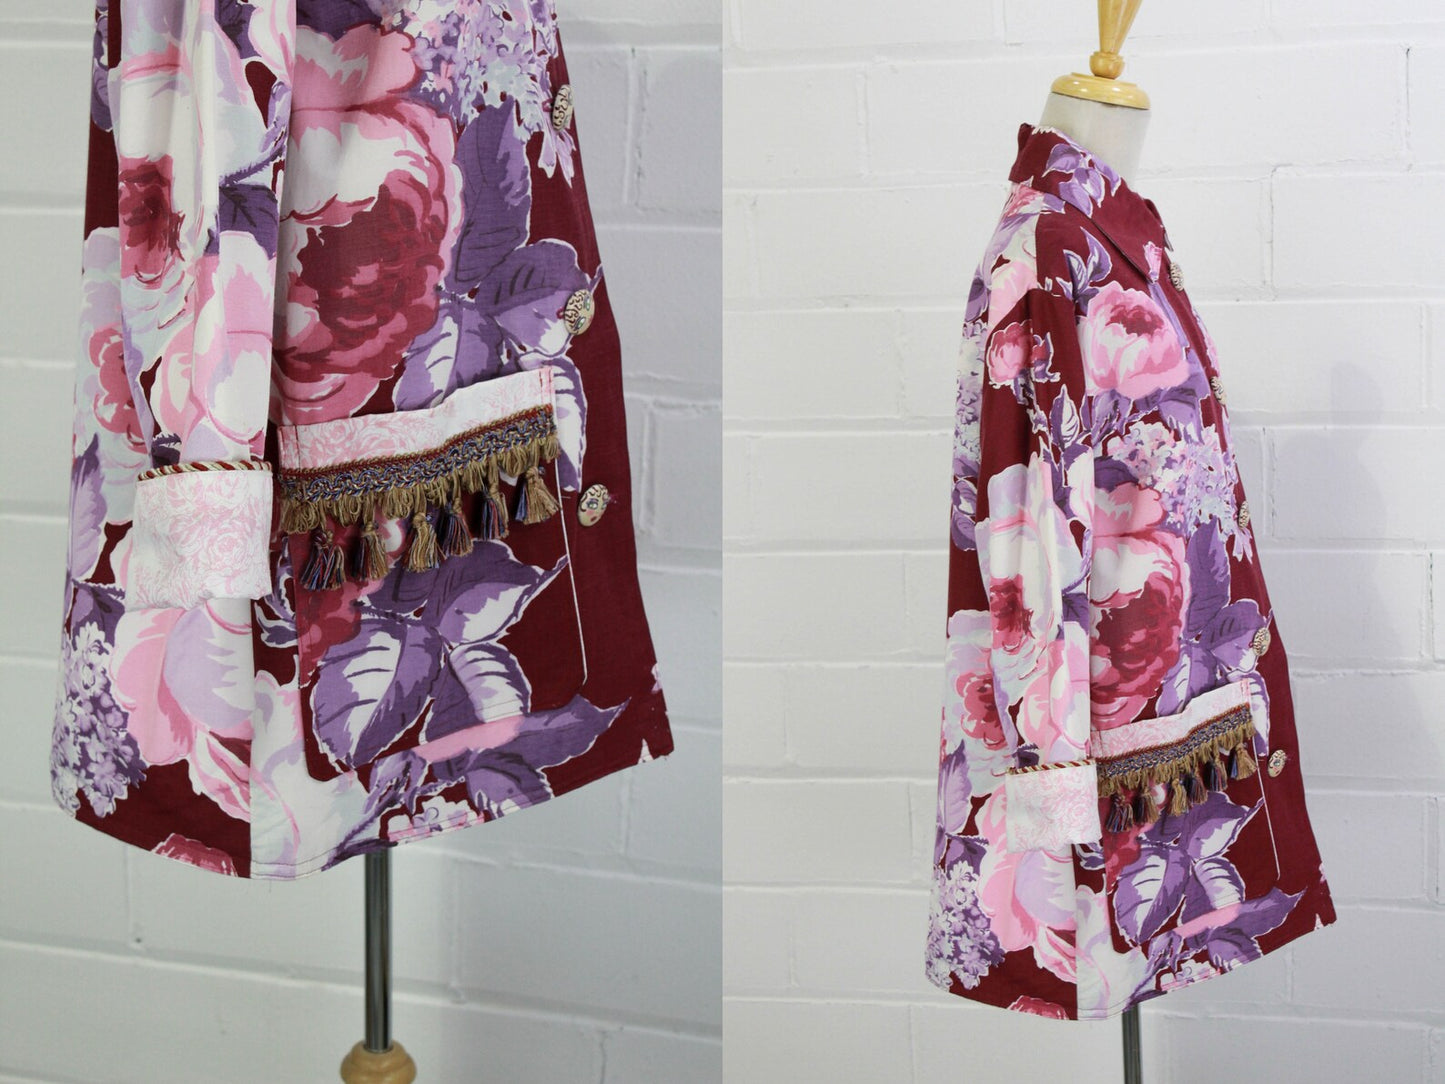 Vintage Upcycled Purple Floral Print Jacket, Medium, One of a Kind, Patch Pockets, Tassel Trim, Hand Painted Face Buttons